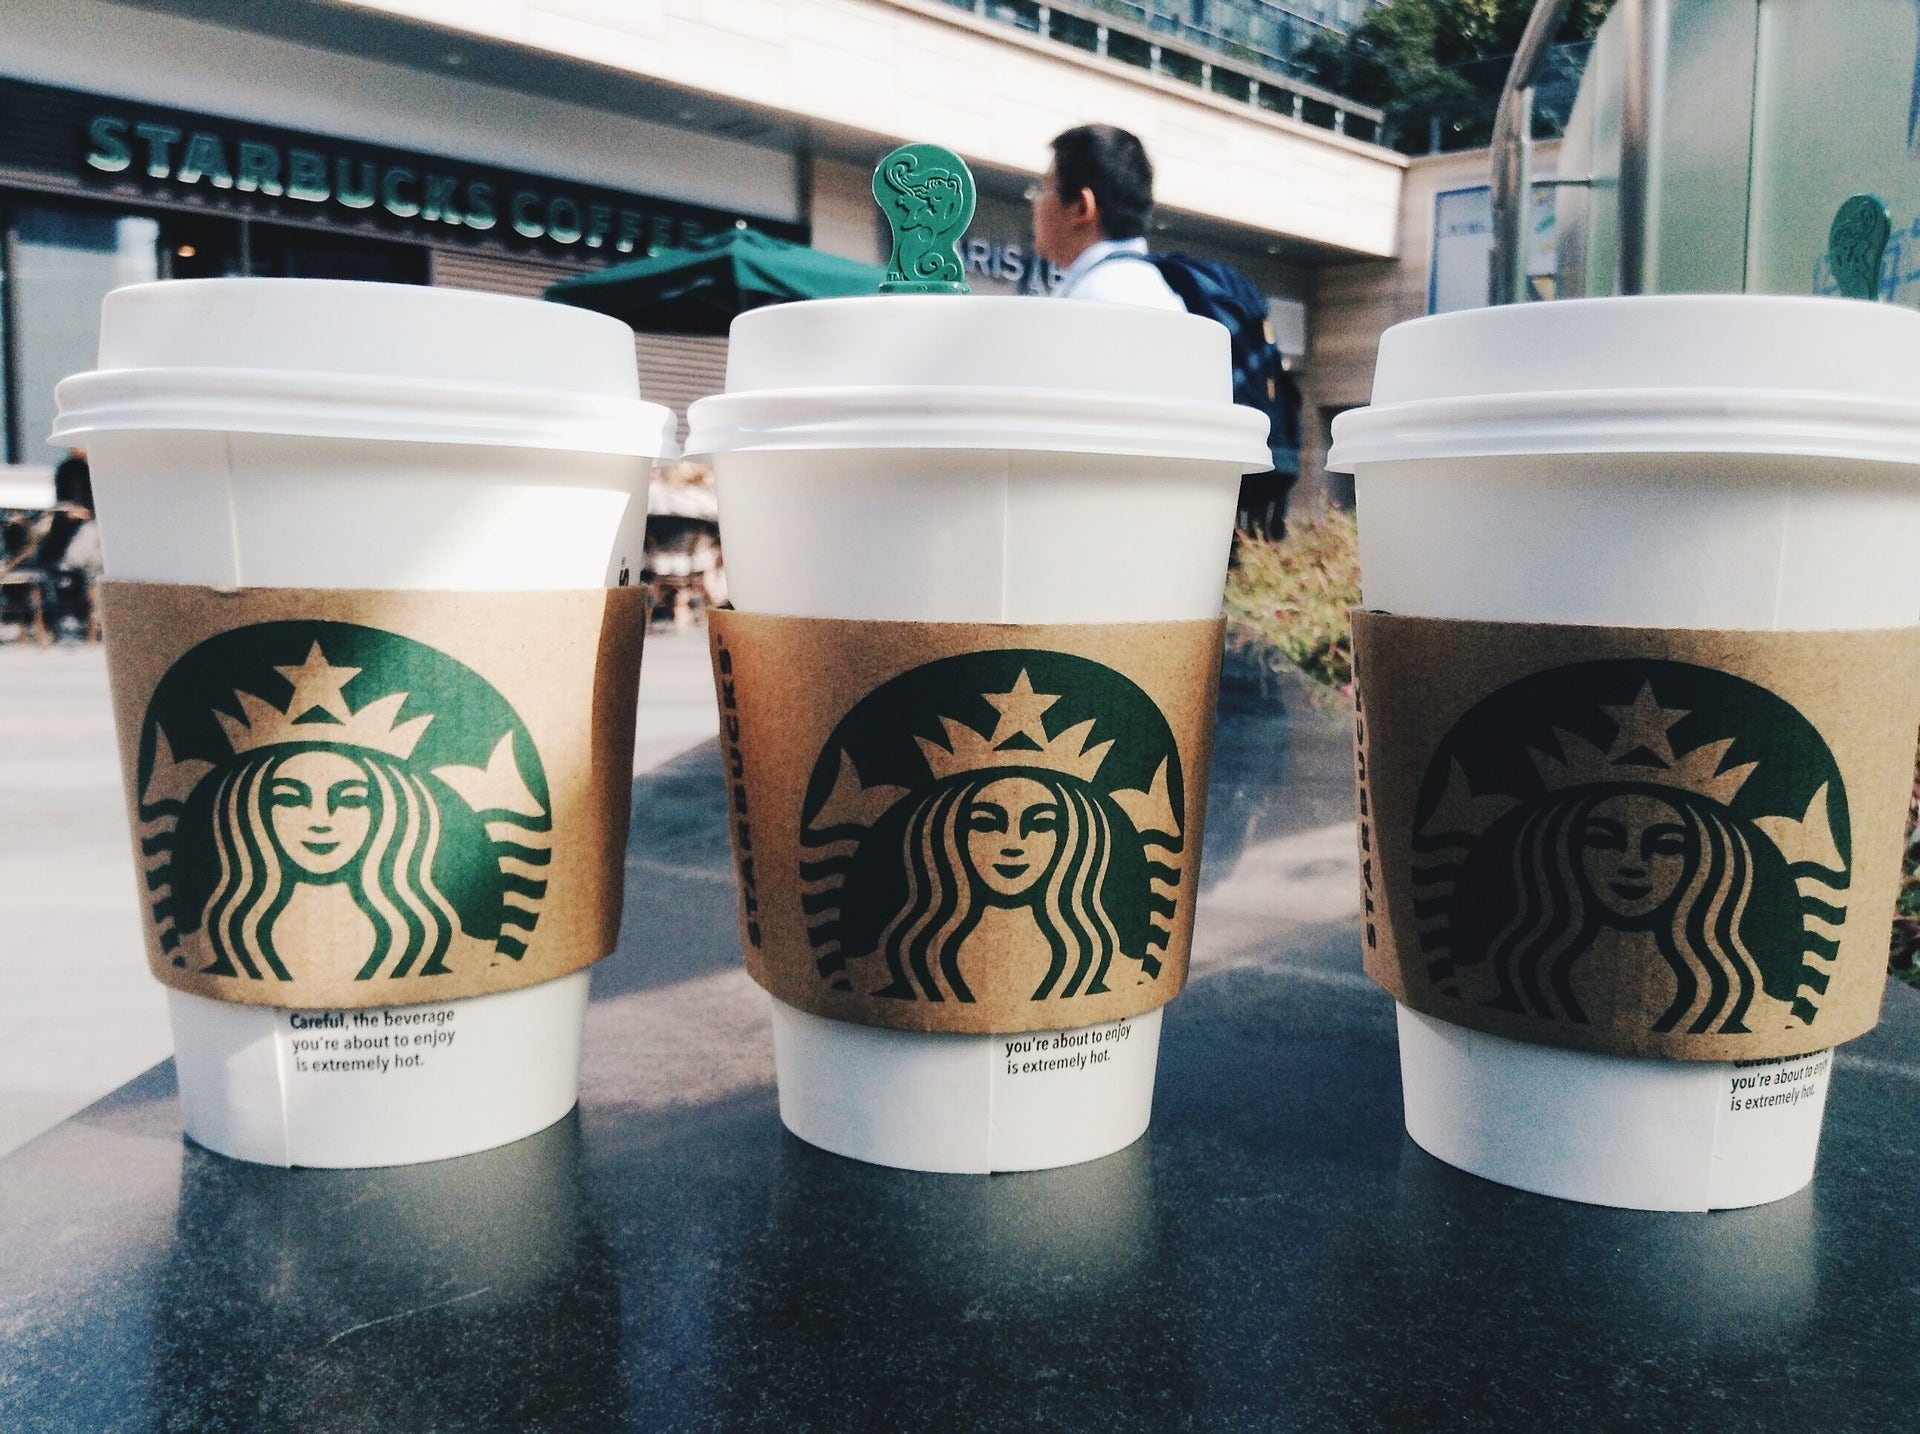 Starbucks' Ambitious Plans Trigger 9% Price Target Hike By This Analyst